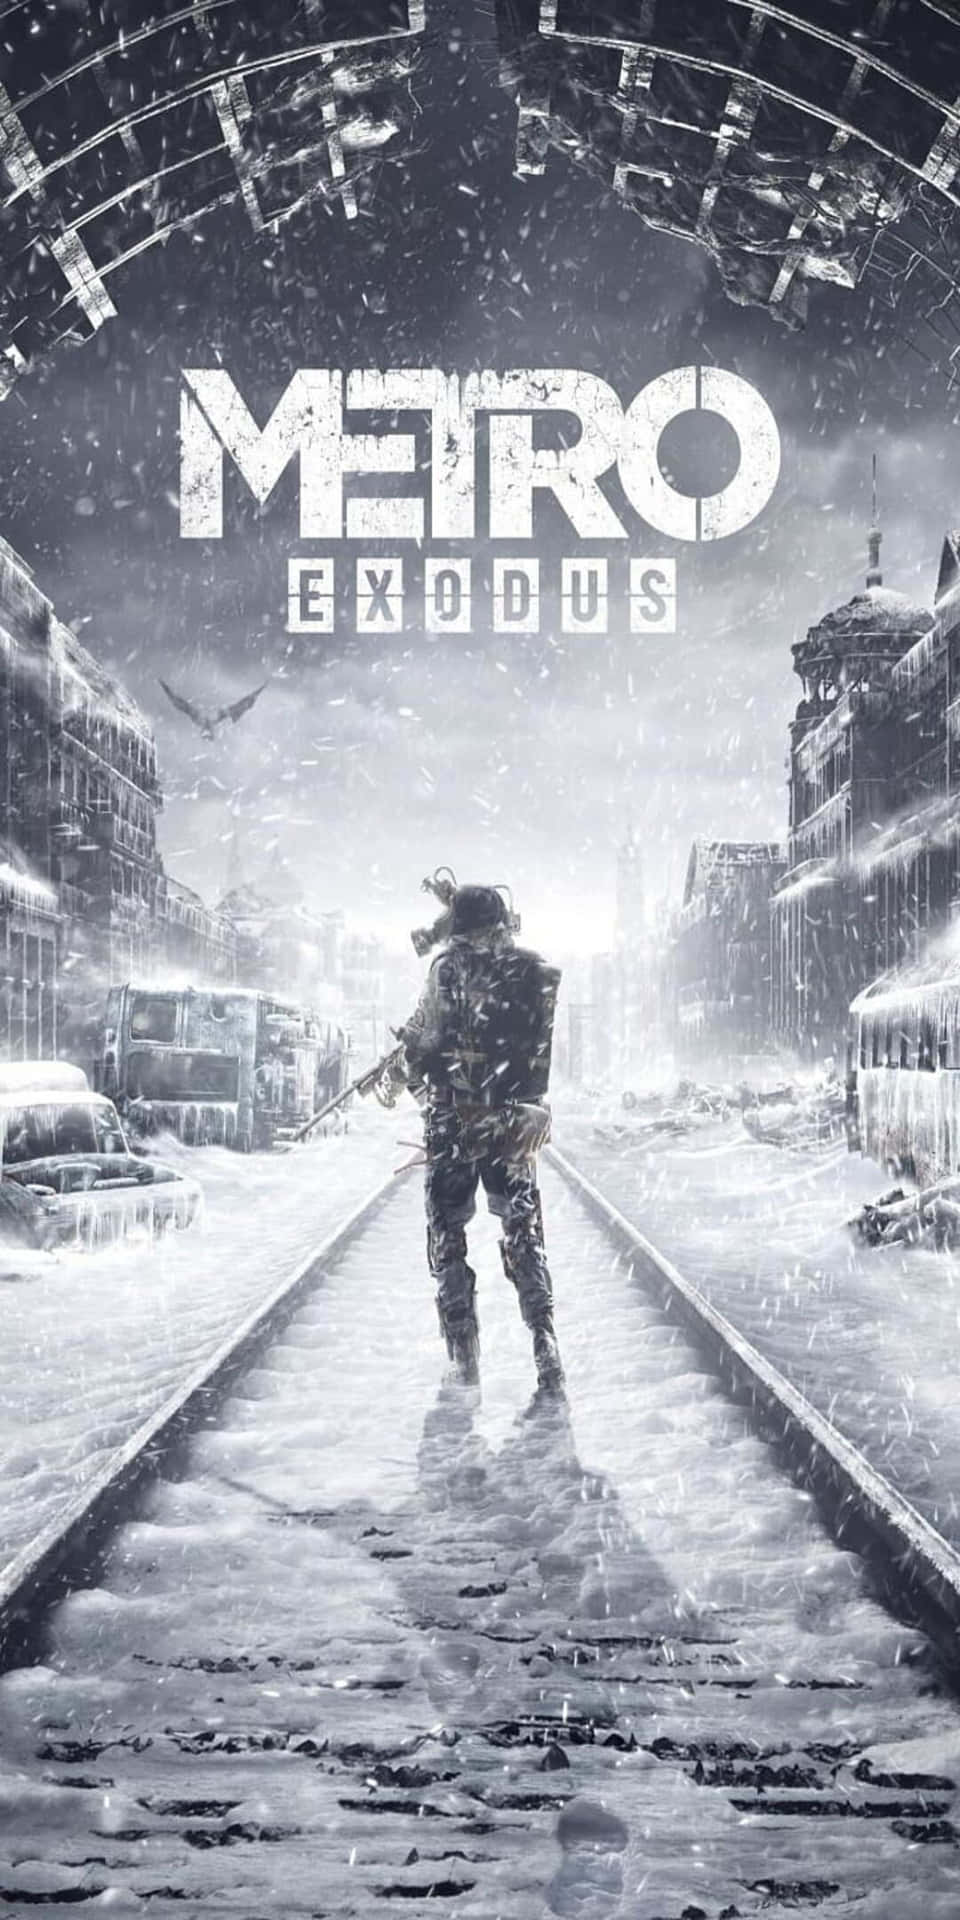 Game Character Inside The Rail Track Pixel 3 Metro 2033 Snow Theme Background